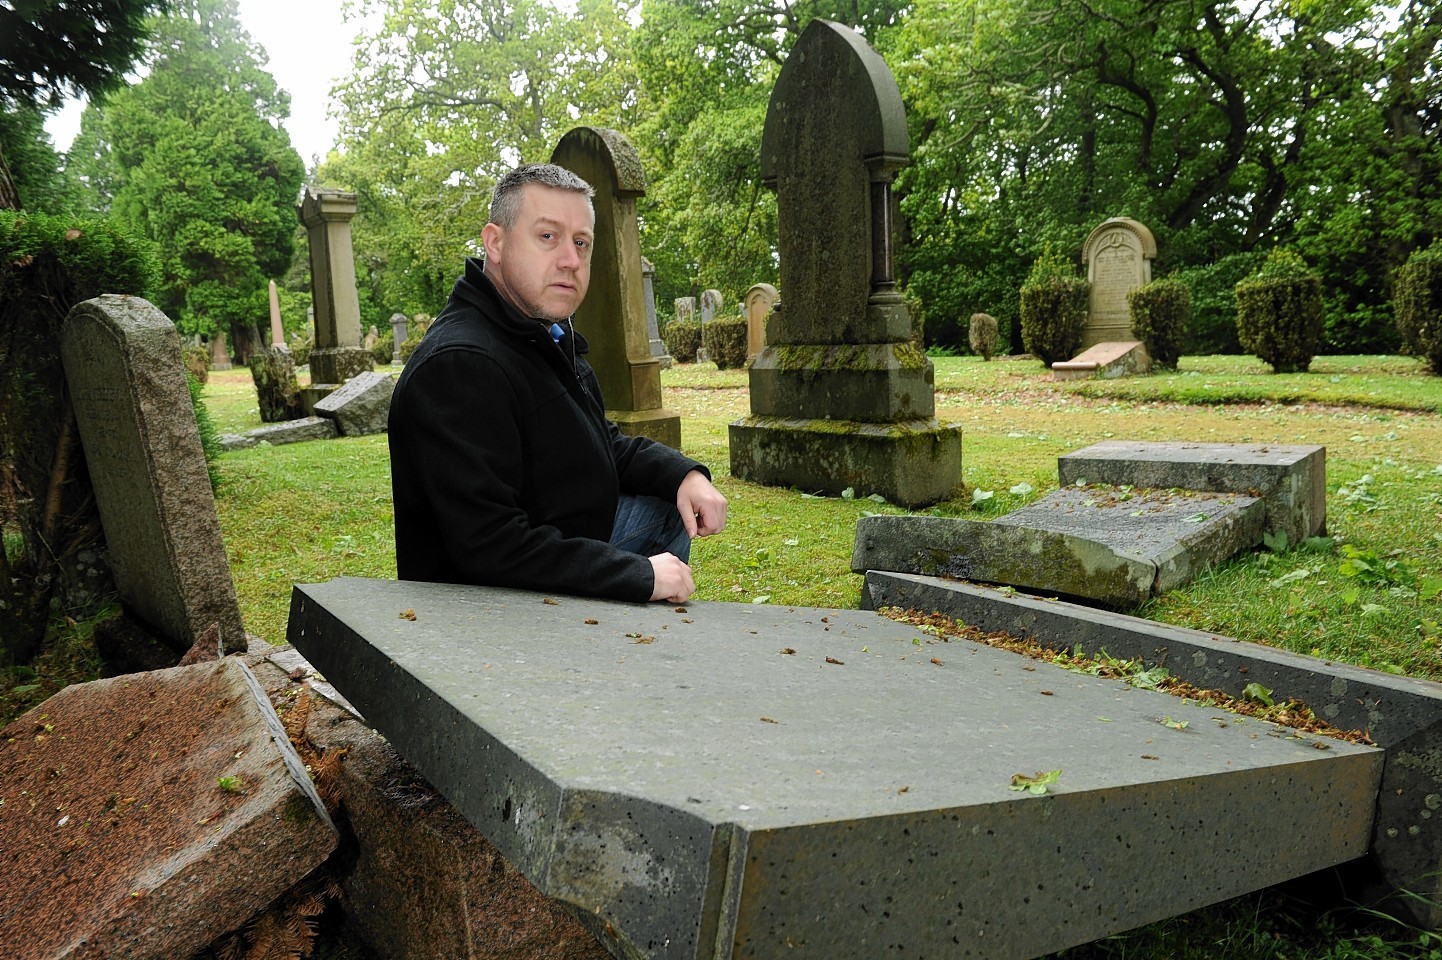 Allan Duffy next to one of the ruined gravestones